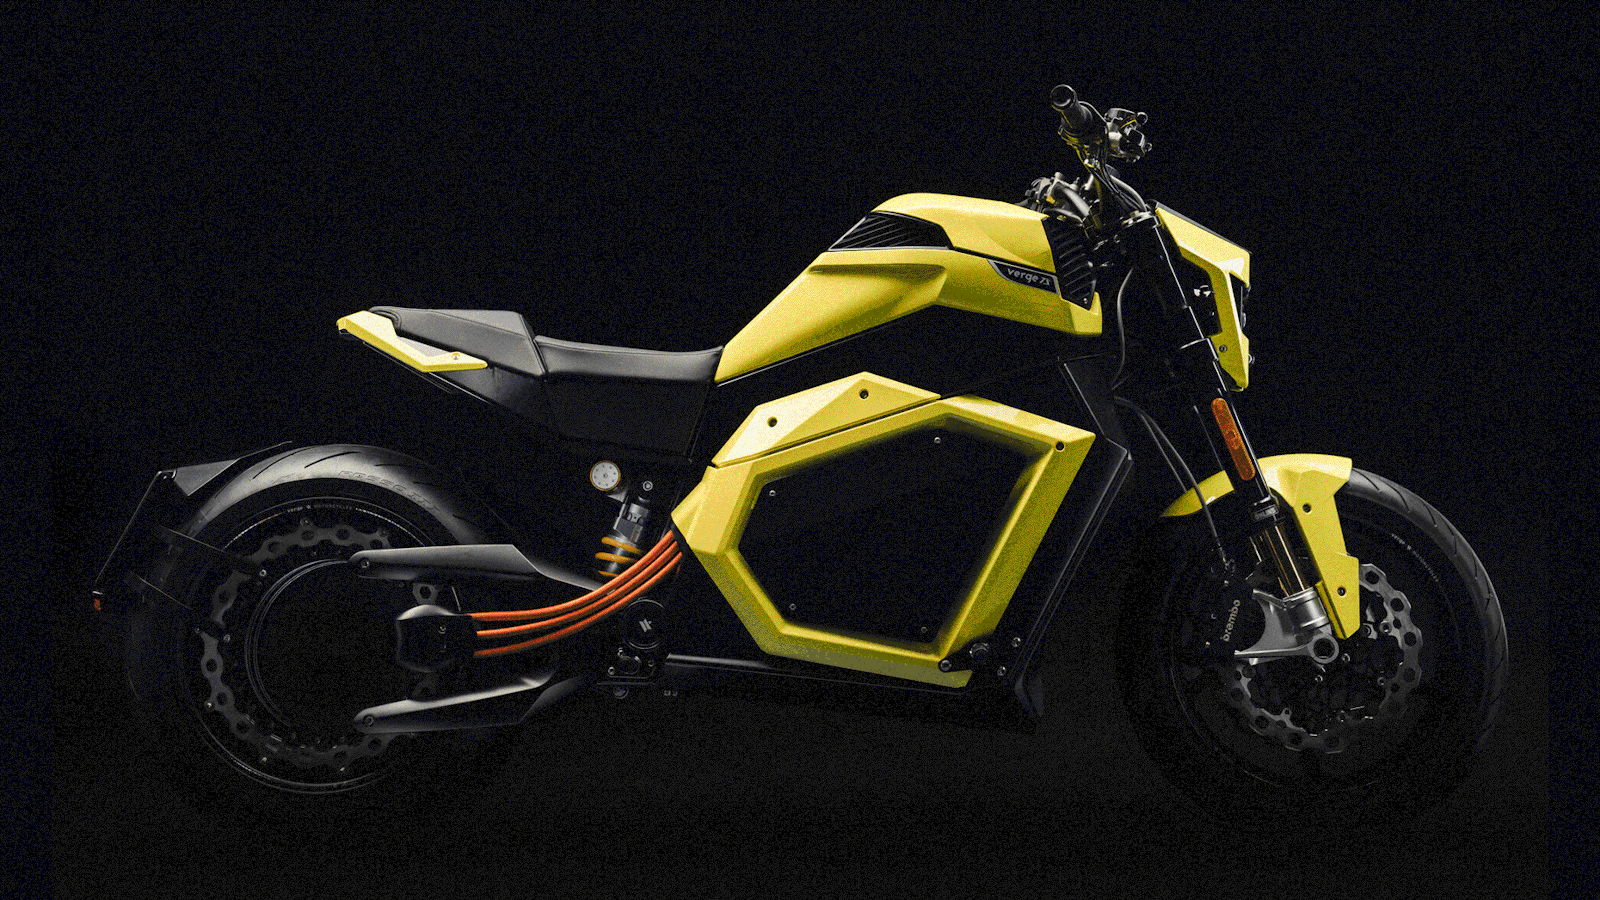 tandlæge pubertet Observation If Teslas Had a Kickstand: Premium Electric Motorcycles Are Finally Ready  to Ride — The Information